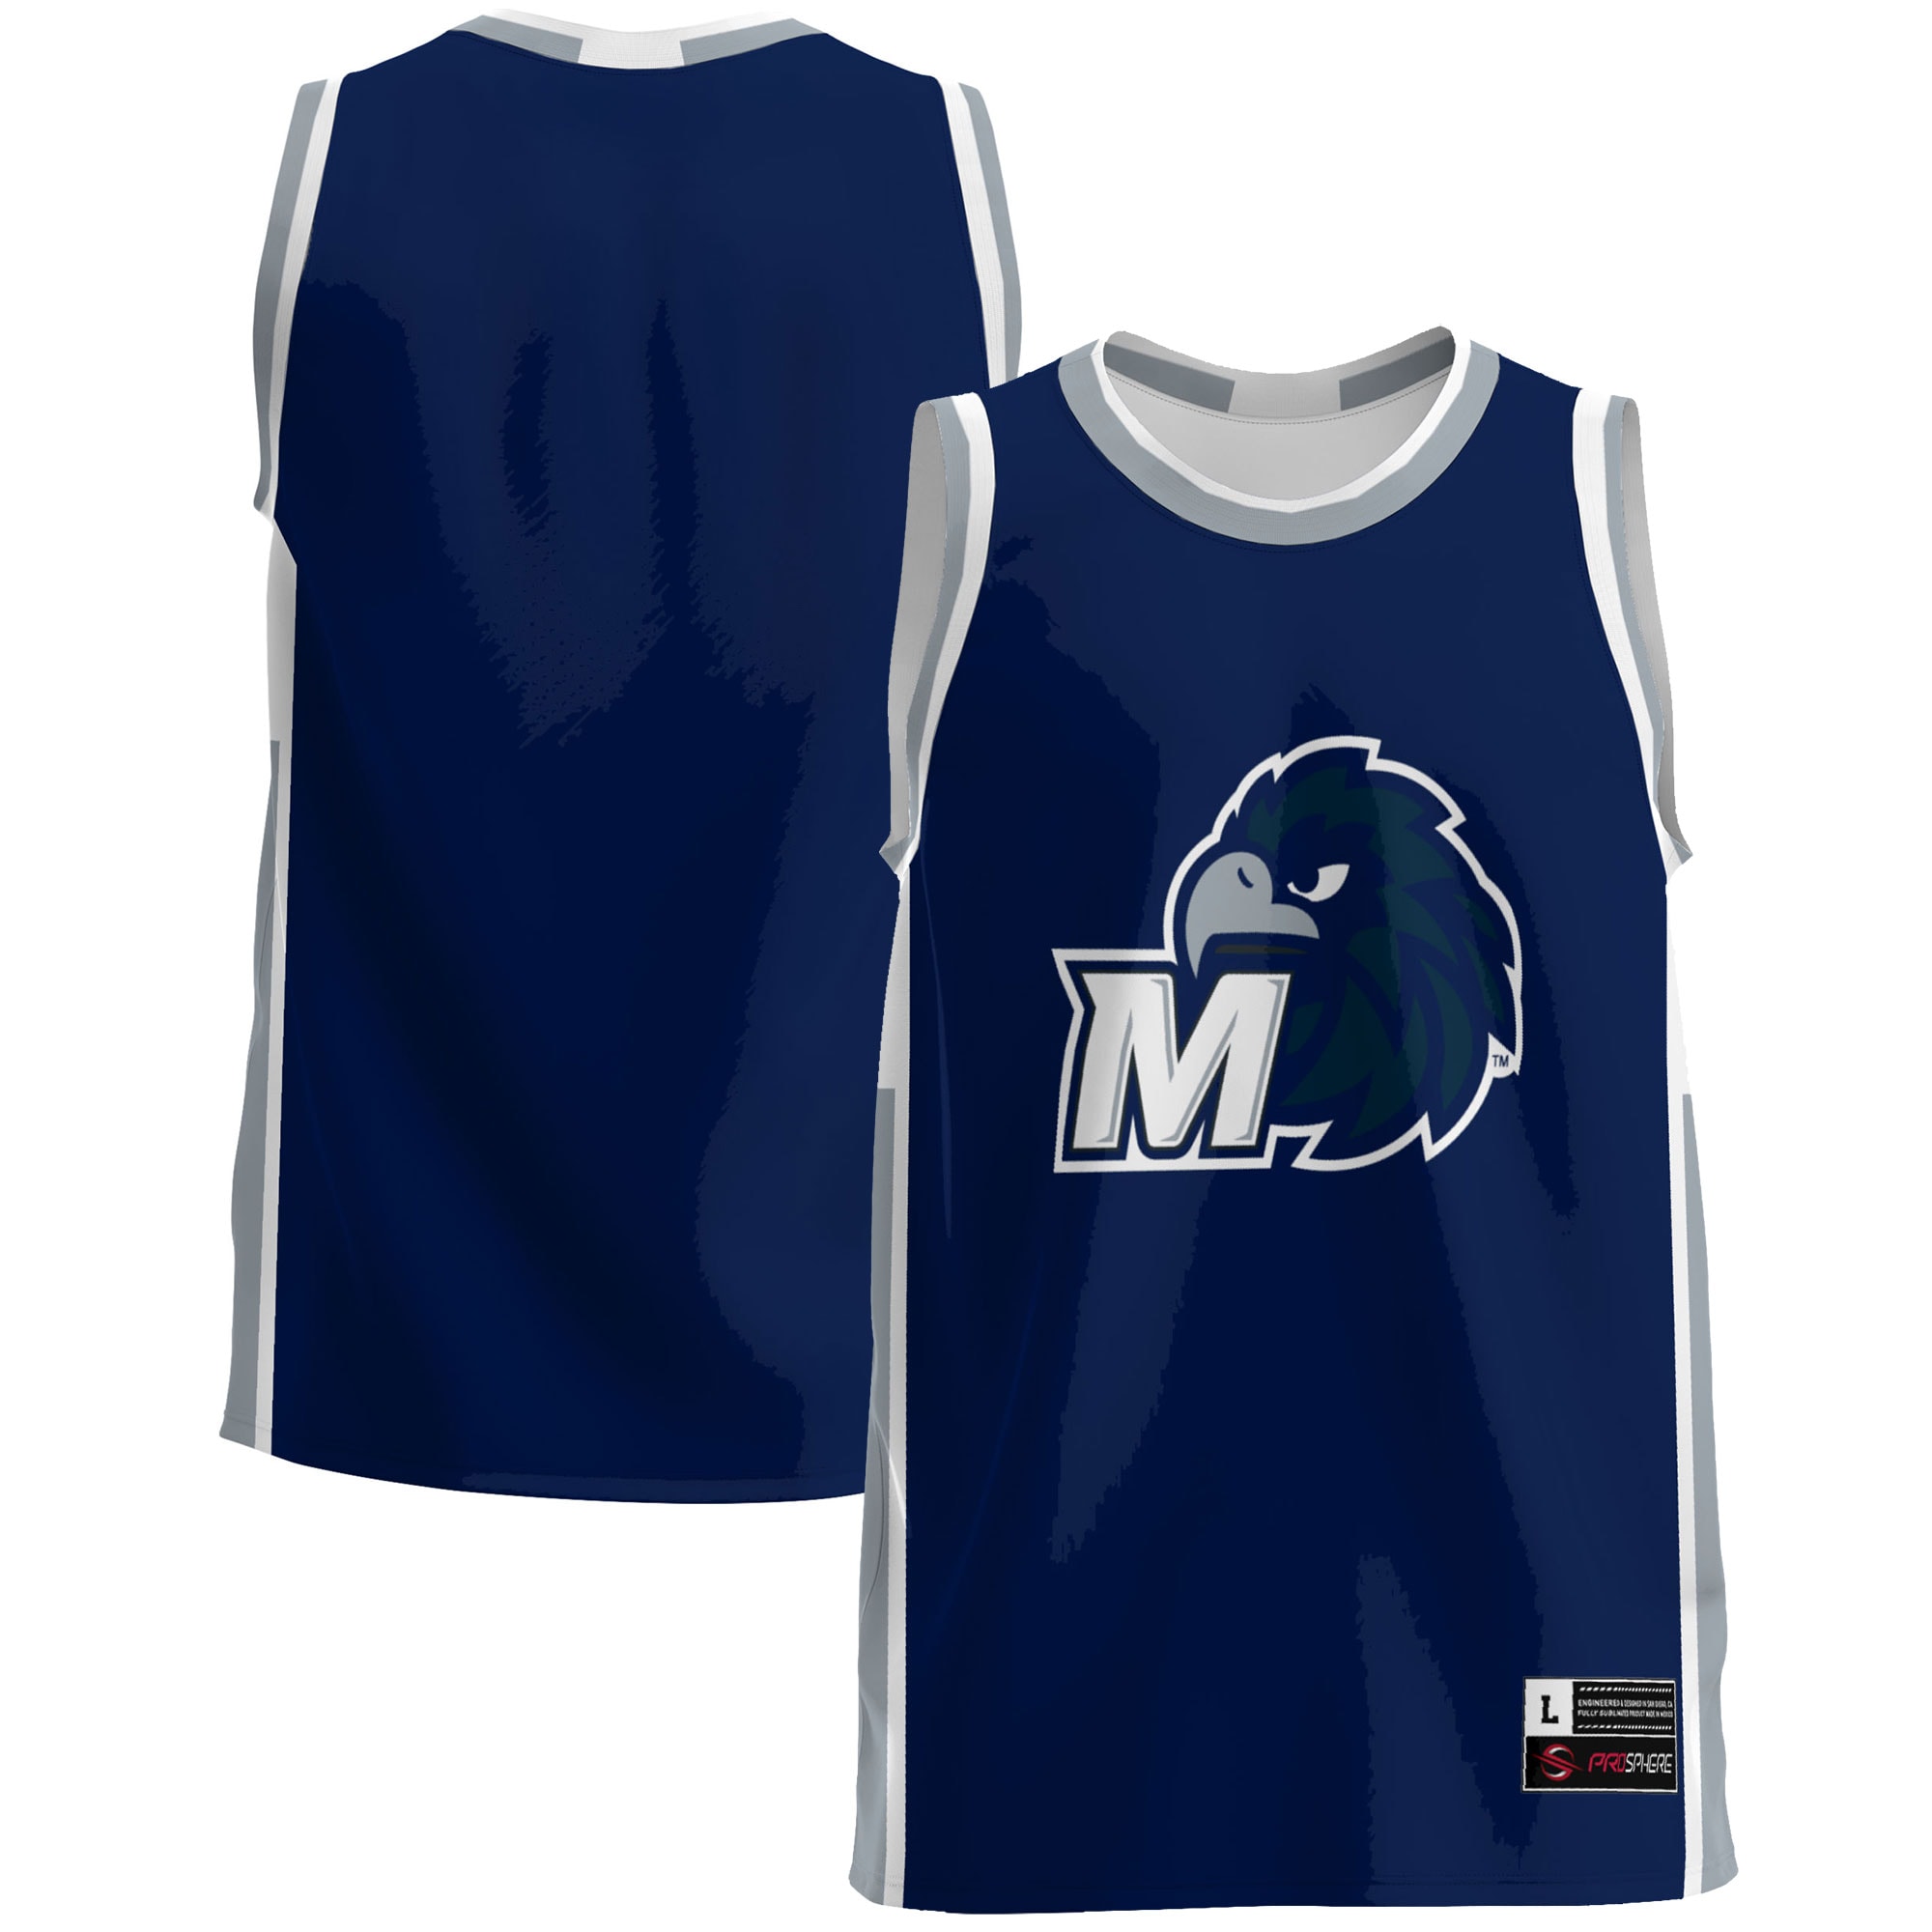 Monmouth Hawks Basketball Jersey - Royal For Youth Women Men